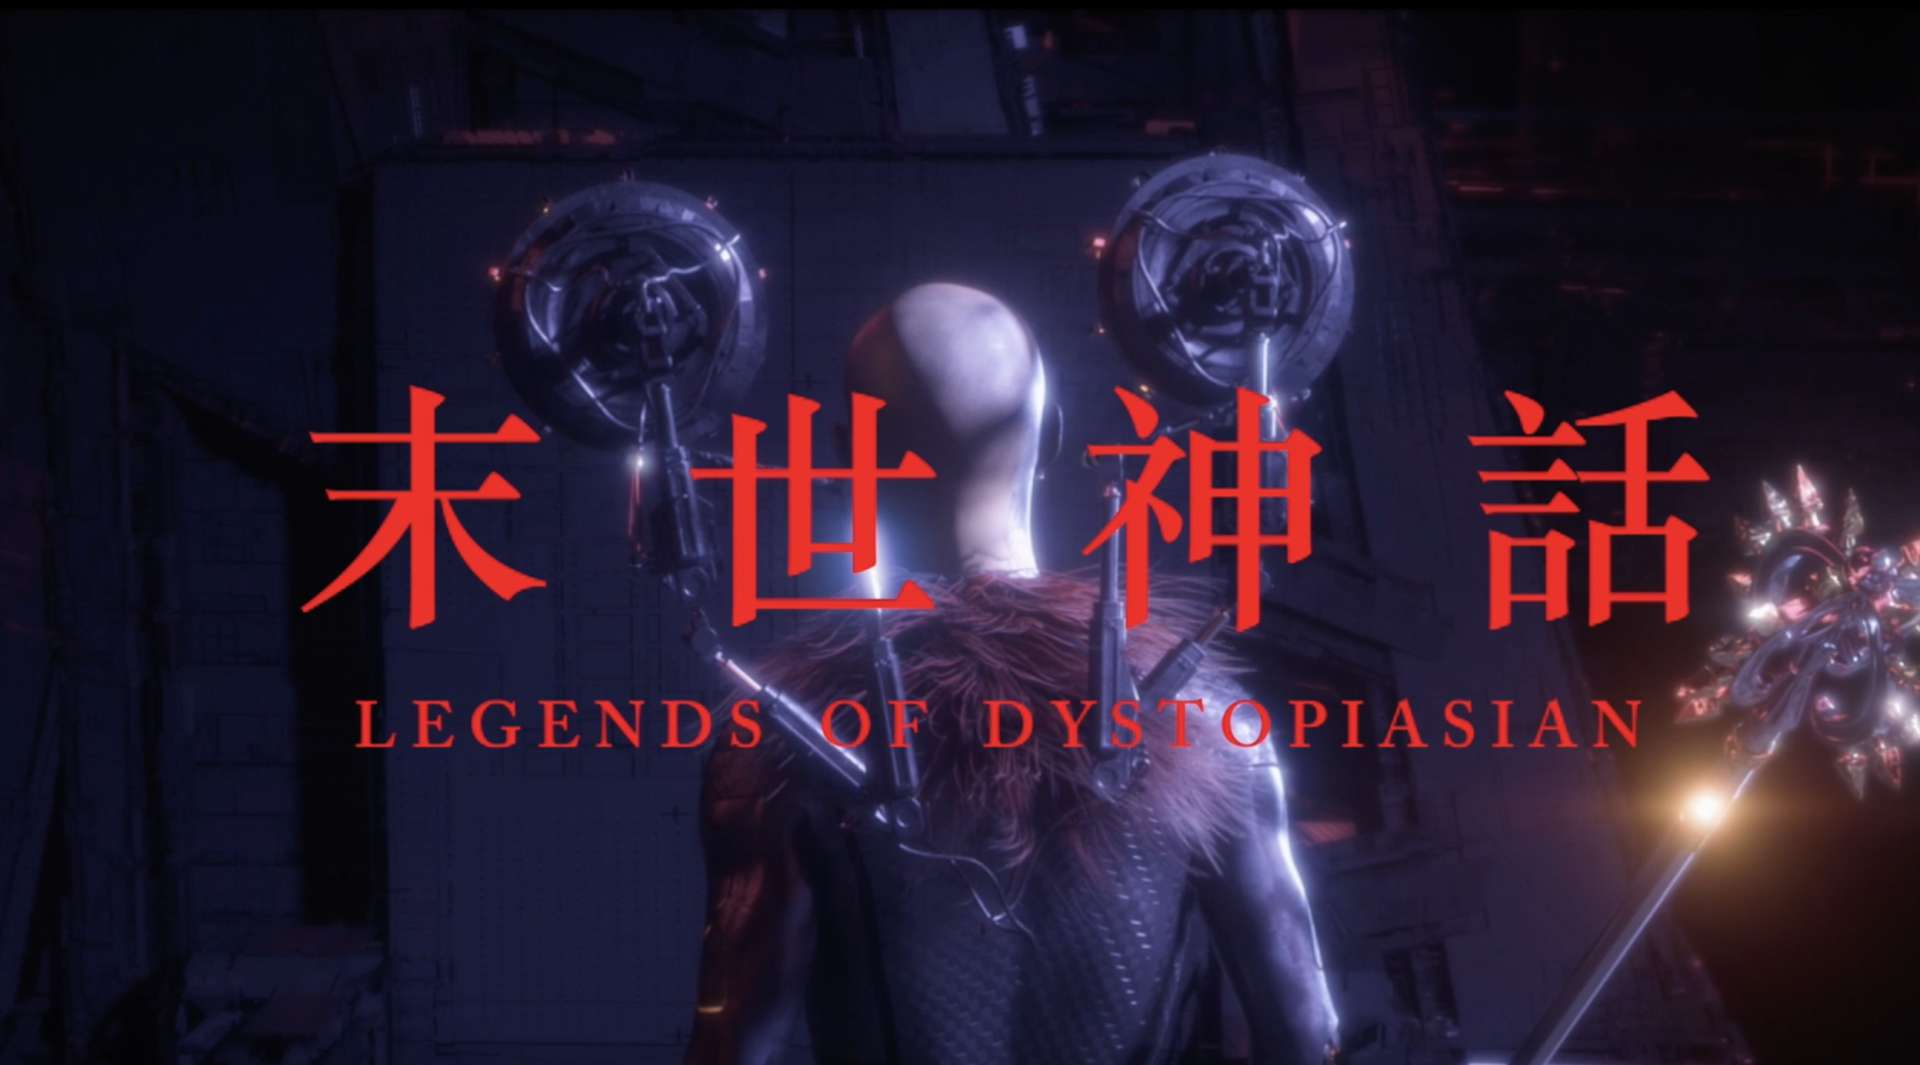 ༺ཌ LEGENDS OF DYSTOPIASIAN ད༻